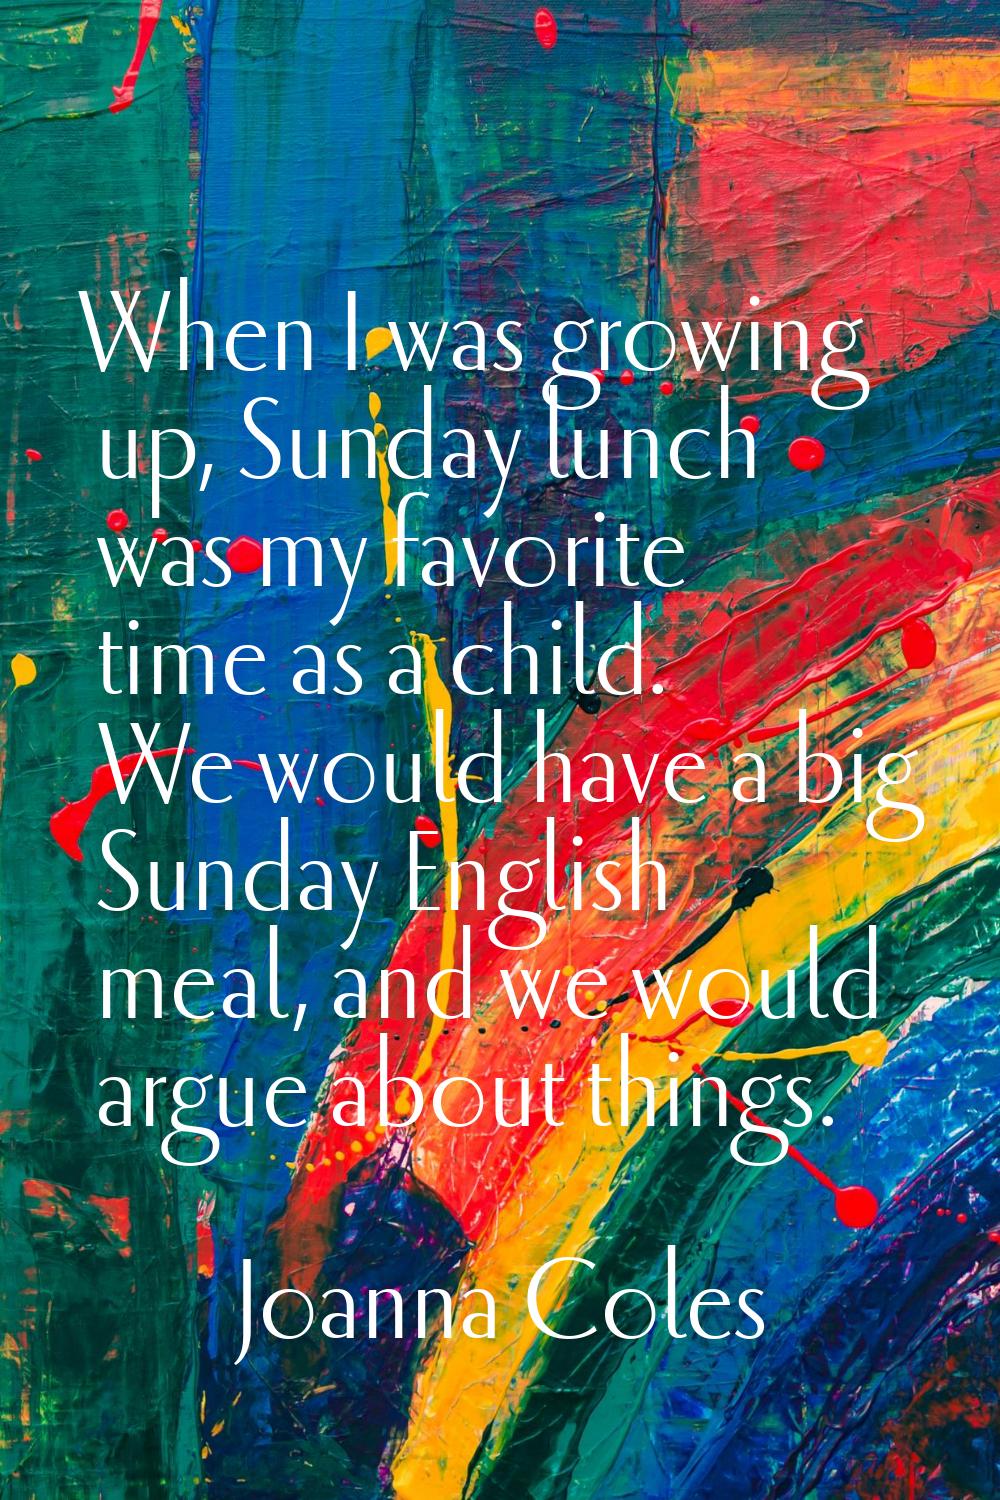 When I was growing up, Sunday lunch was my favorite time as a child. We would have a big Sunday Eng